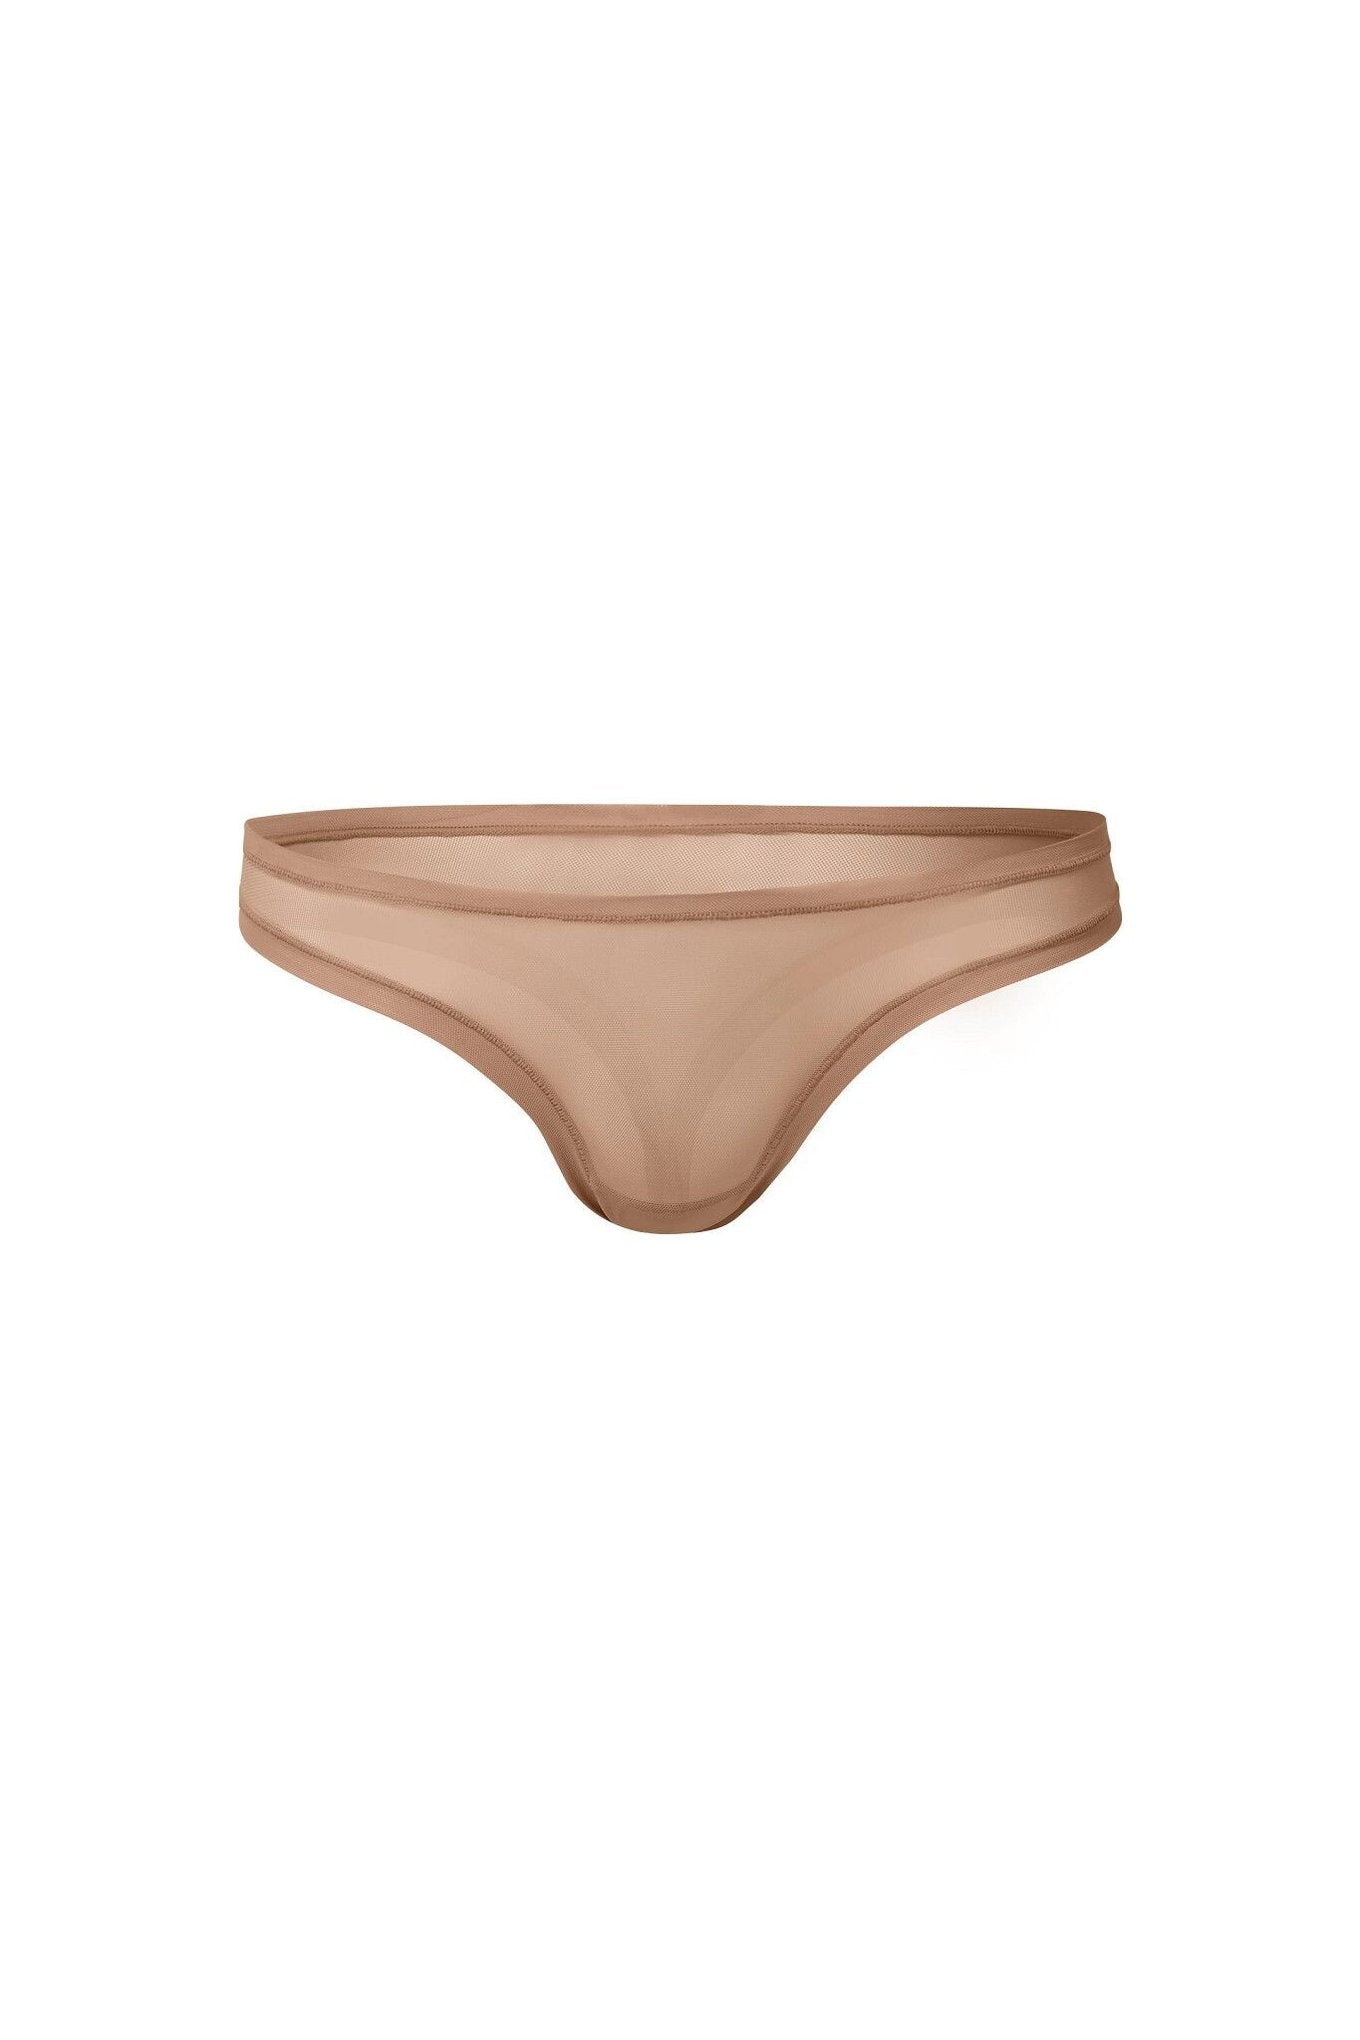 nueskin Bonnie Mesh Low-Rise Thong in color Macaroon and shape thong